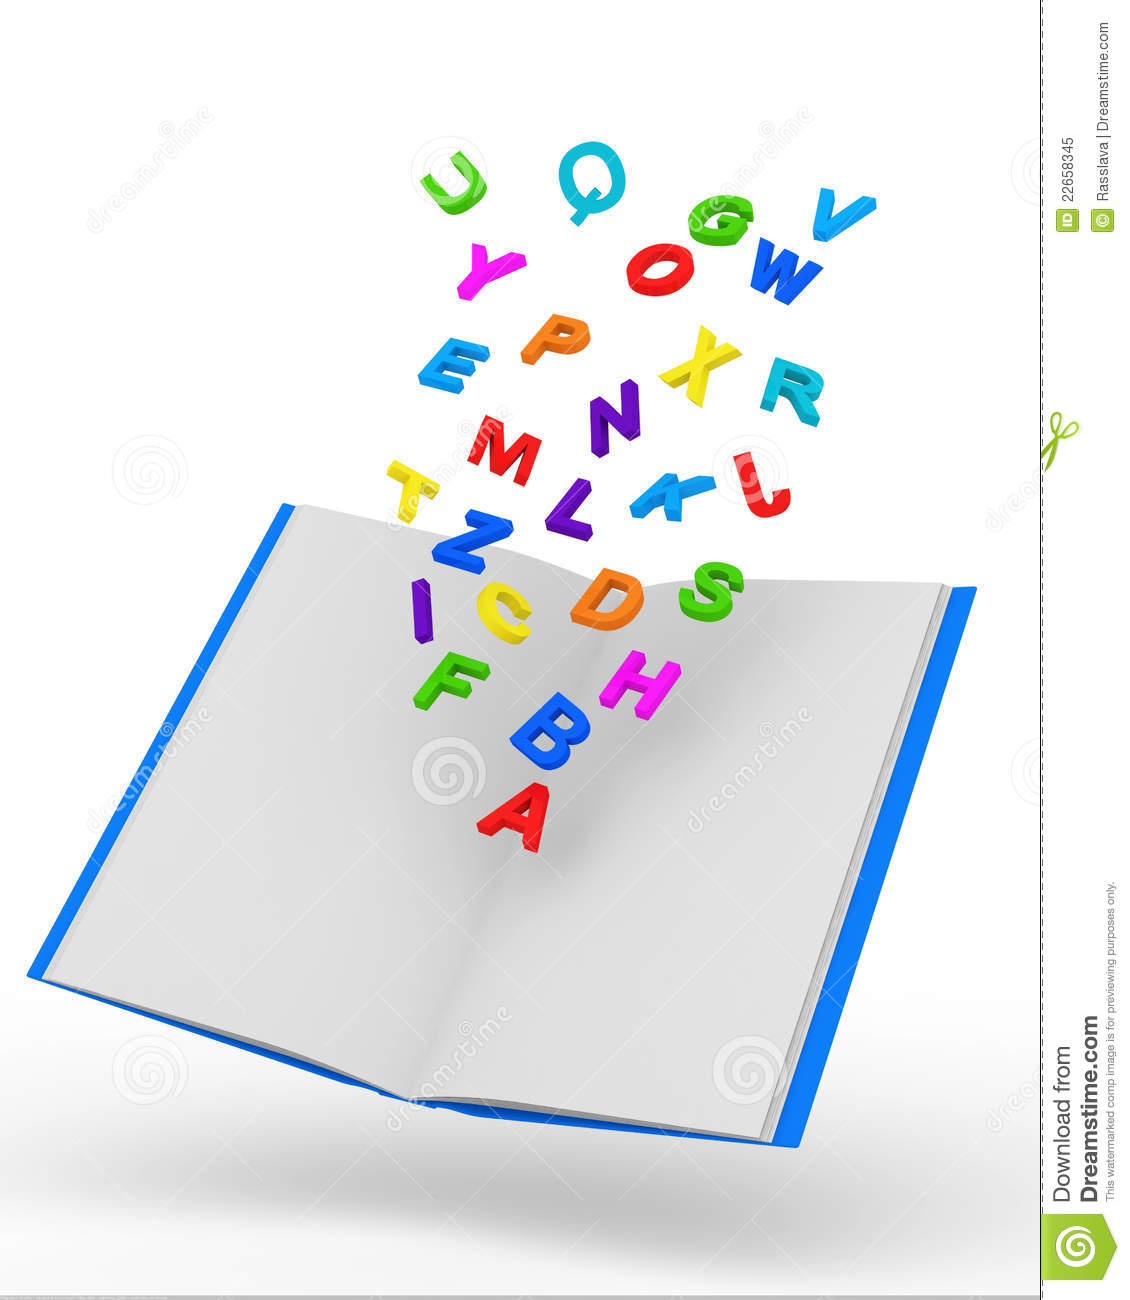 Stock Images Of   Open Book With Colorful Letters On White Backgroun